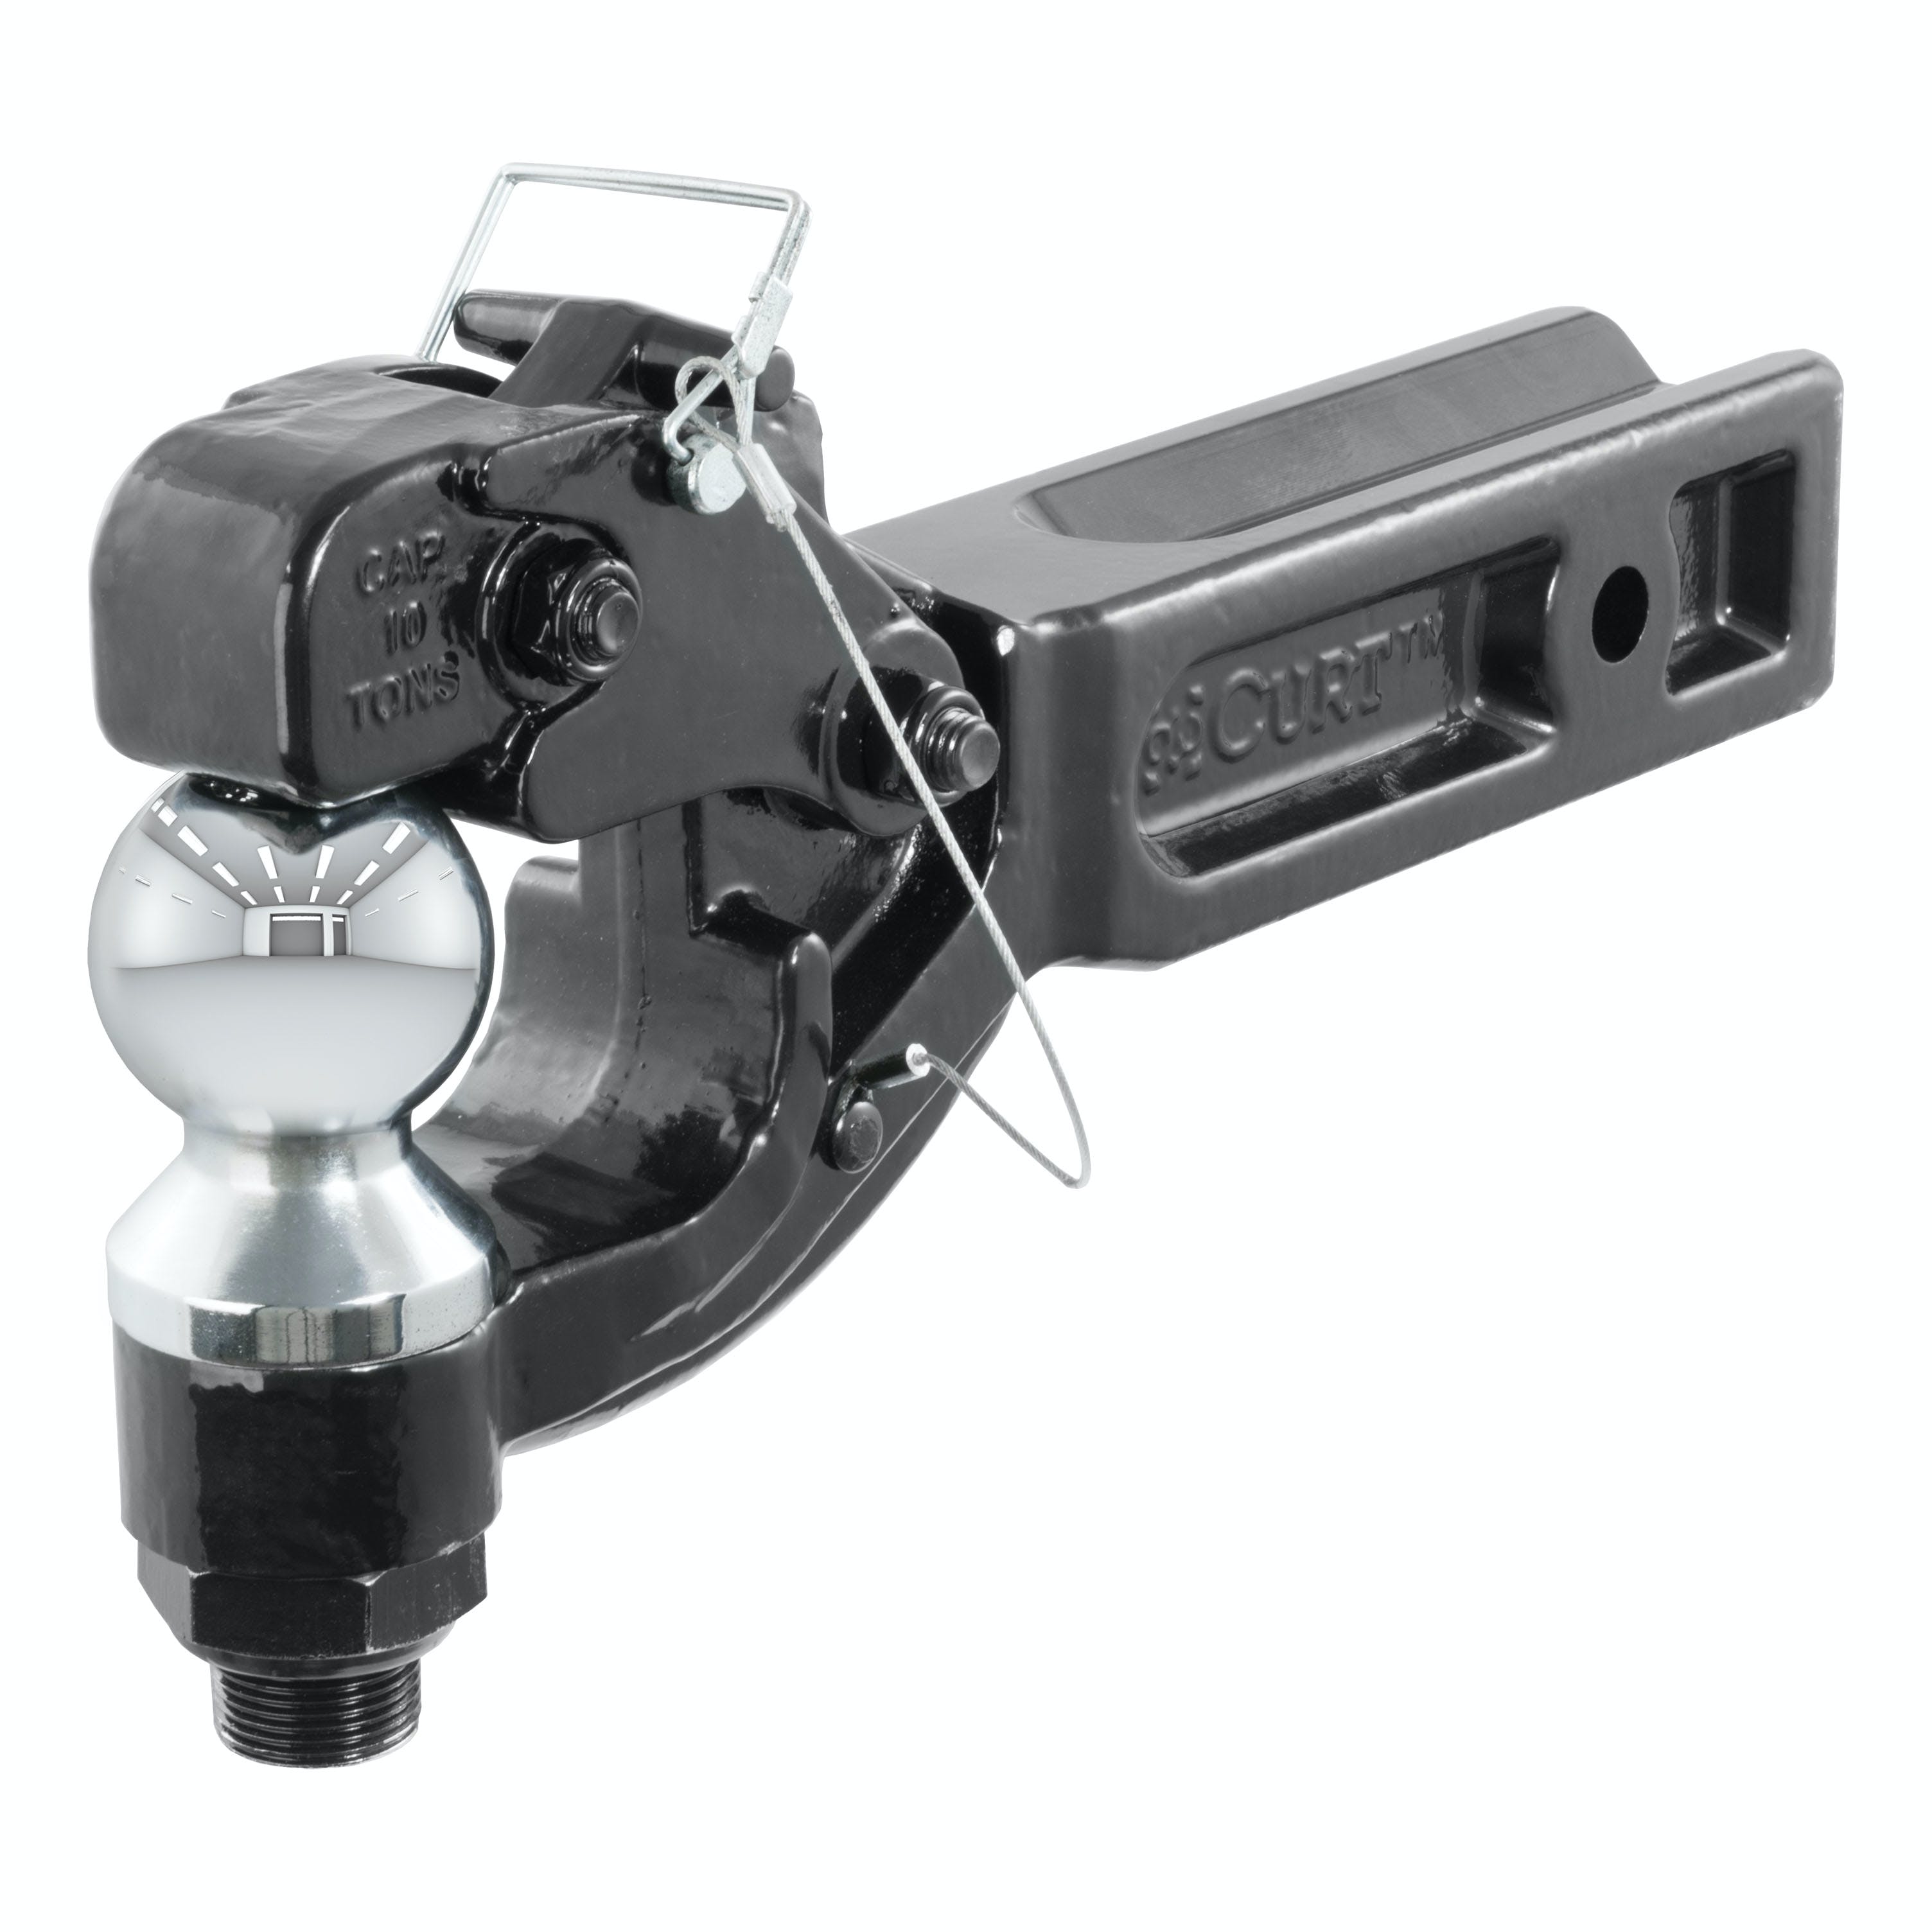 CURT 48012 Receiver-Mount Ball and Pintle Hitch (2-1/2 Shank, 2-5/16 Ball, 20,000 lbs.)